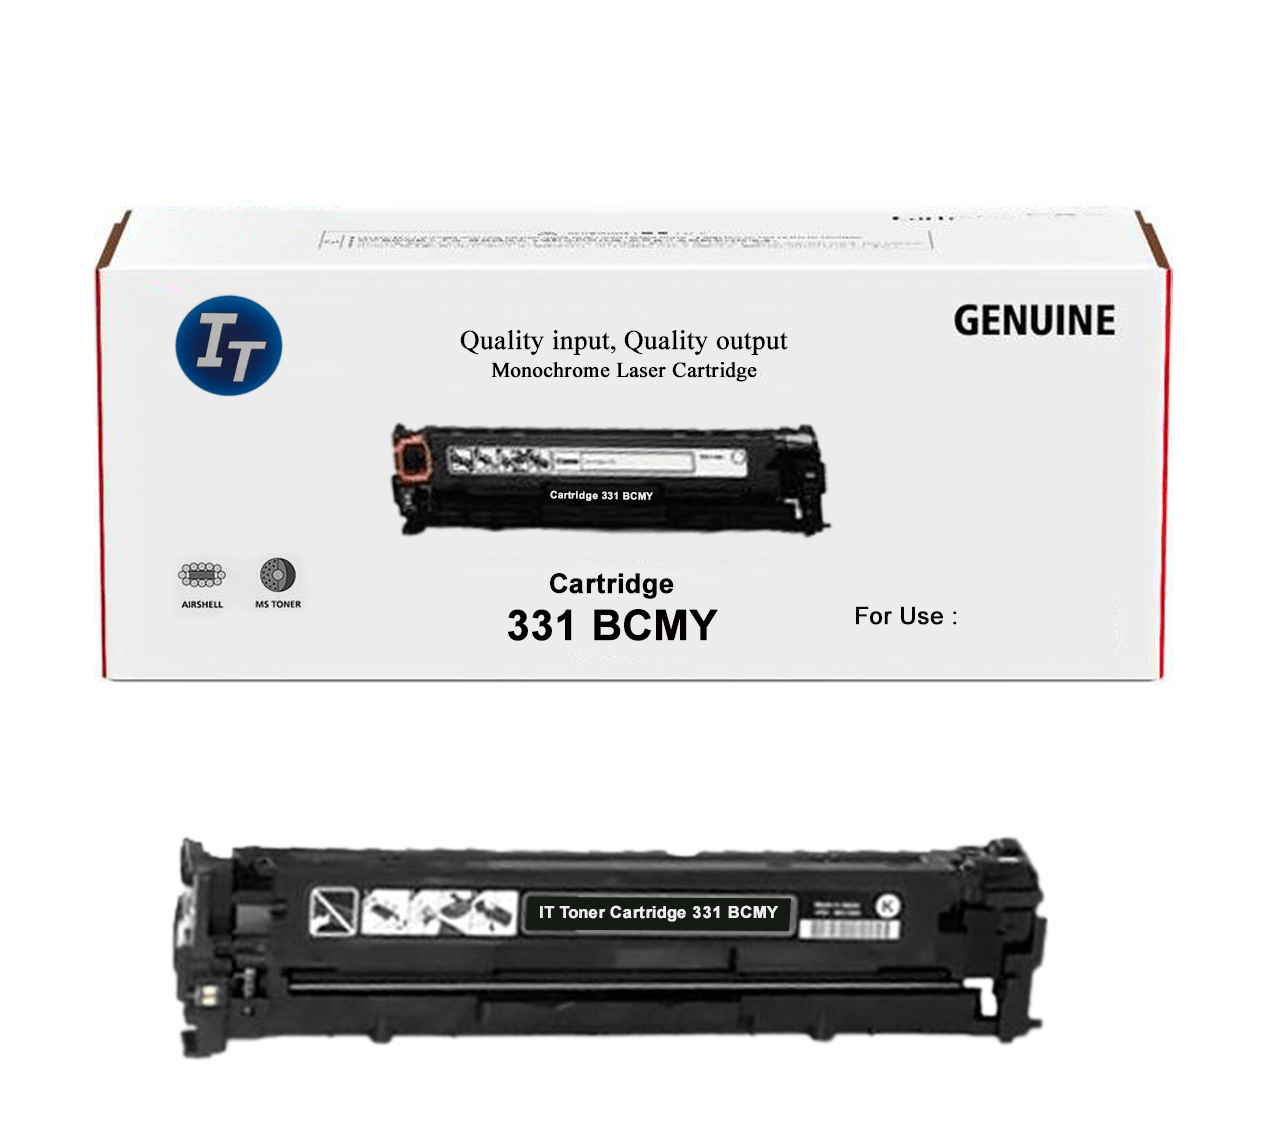 IT Toner Cartridge Canon 331 BCMY (7) (1).png